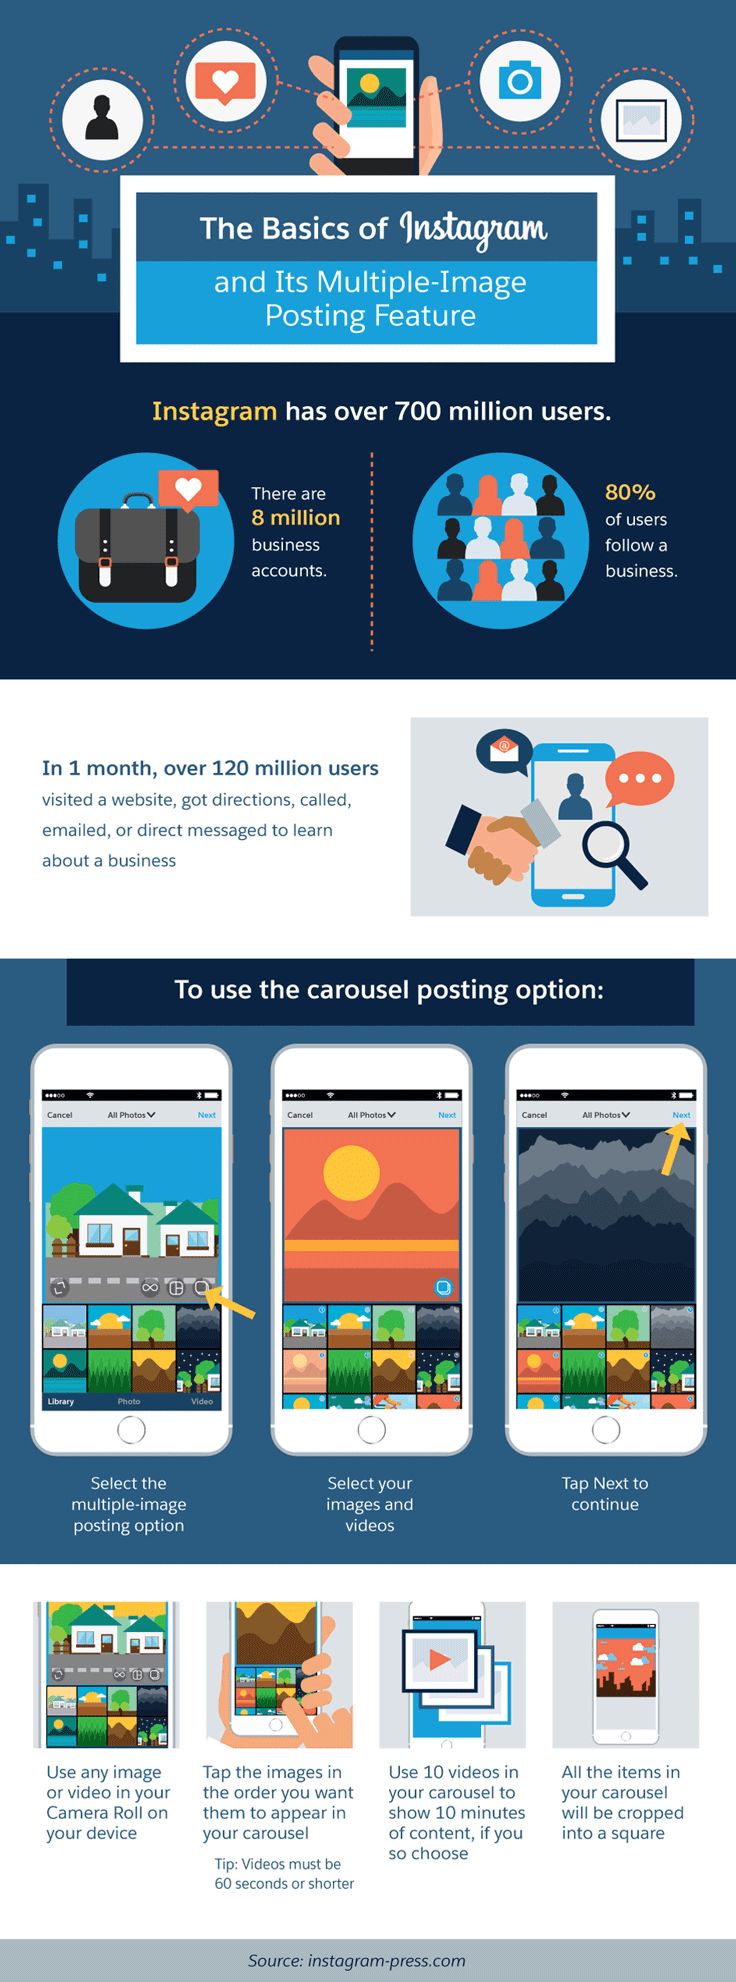 1529835223_331_Marketing-Infographic-Instagram-marketing-tips-Carousel-feature-lets-you-combine-up-to-10-images-in-a Marketing Infographic : Instagram marketing tips: Carousel feature lets you combine up to 10 images in a...